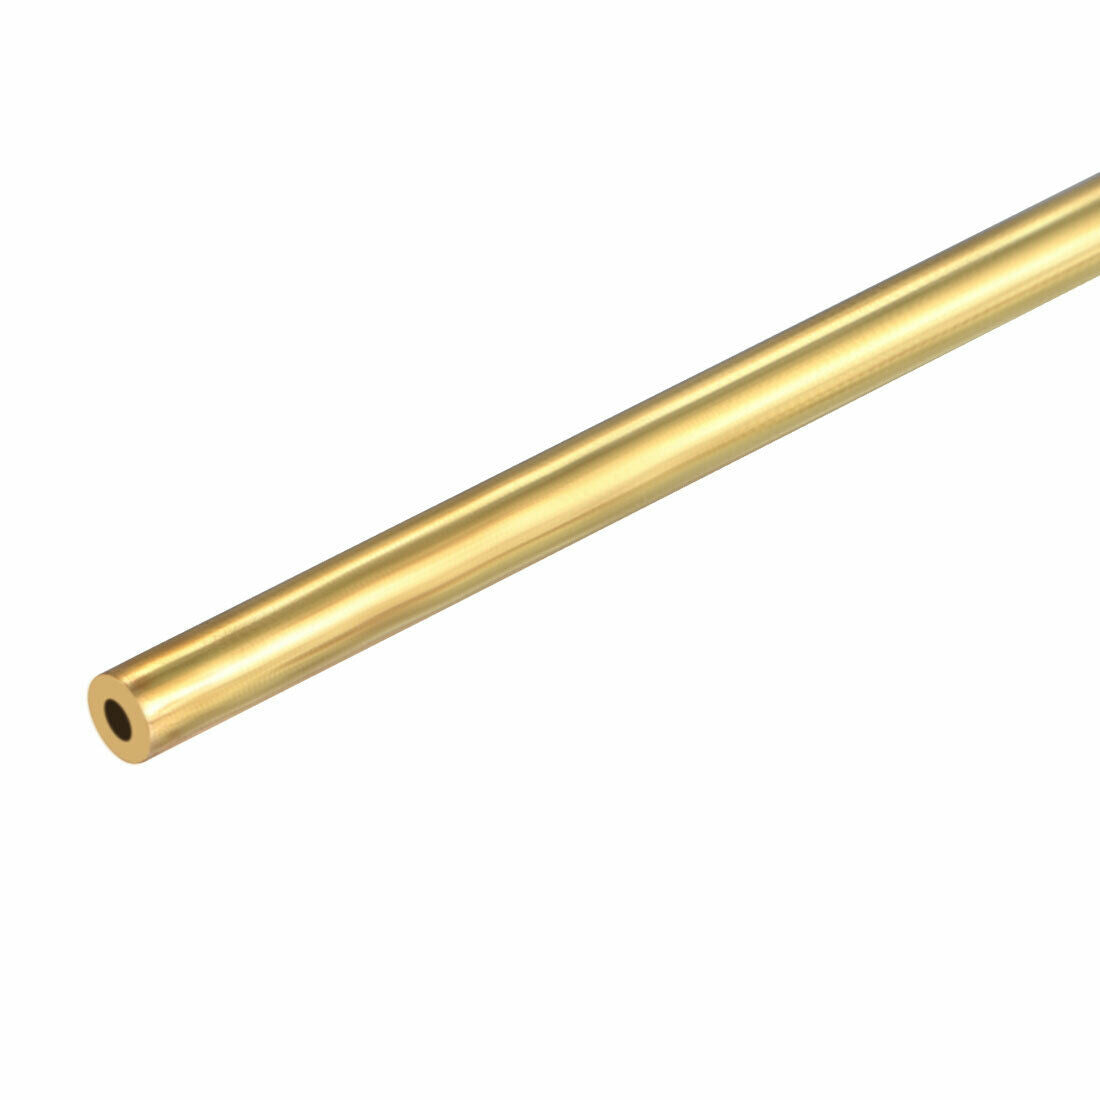 14mm x 12mm x 470mm Brass Pipe Tube Round Bar Rod for RC Boat